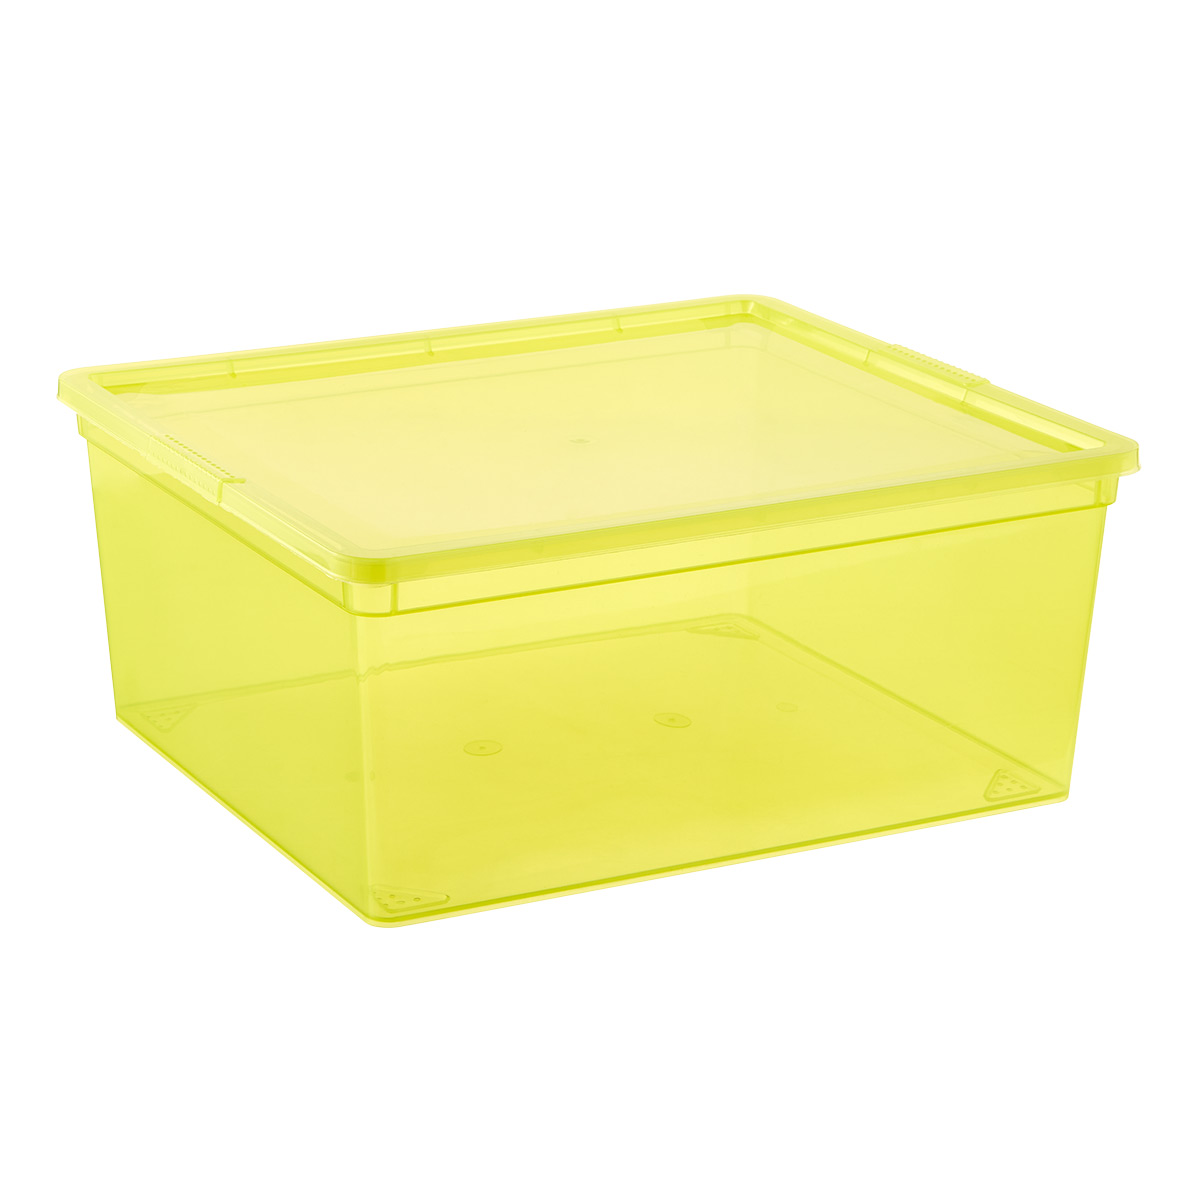 https://www.containerstore.com/catalogimages/434126/10085542_large_our_tidy_box_lemon.jpg